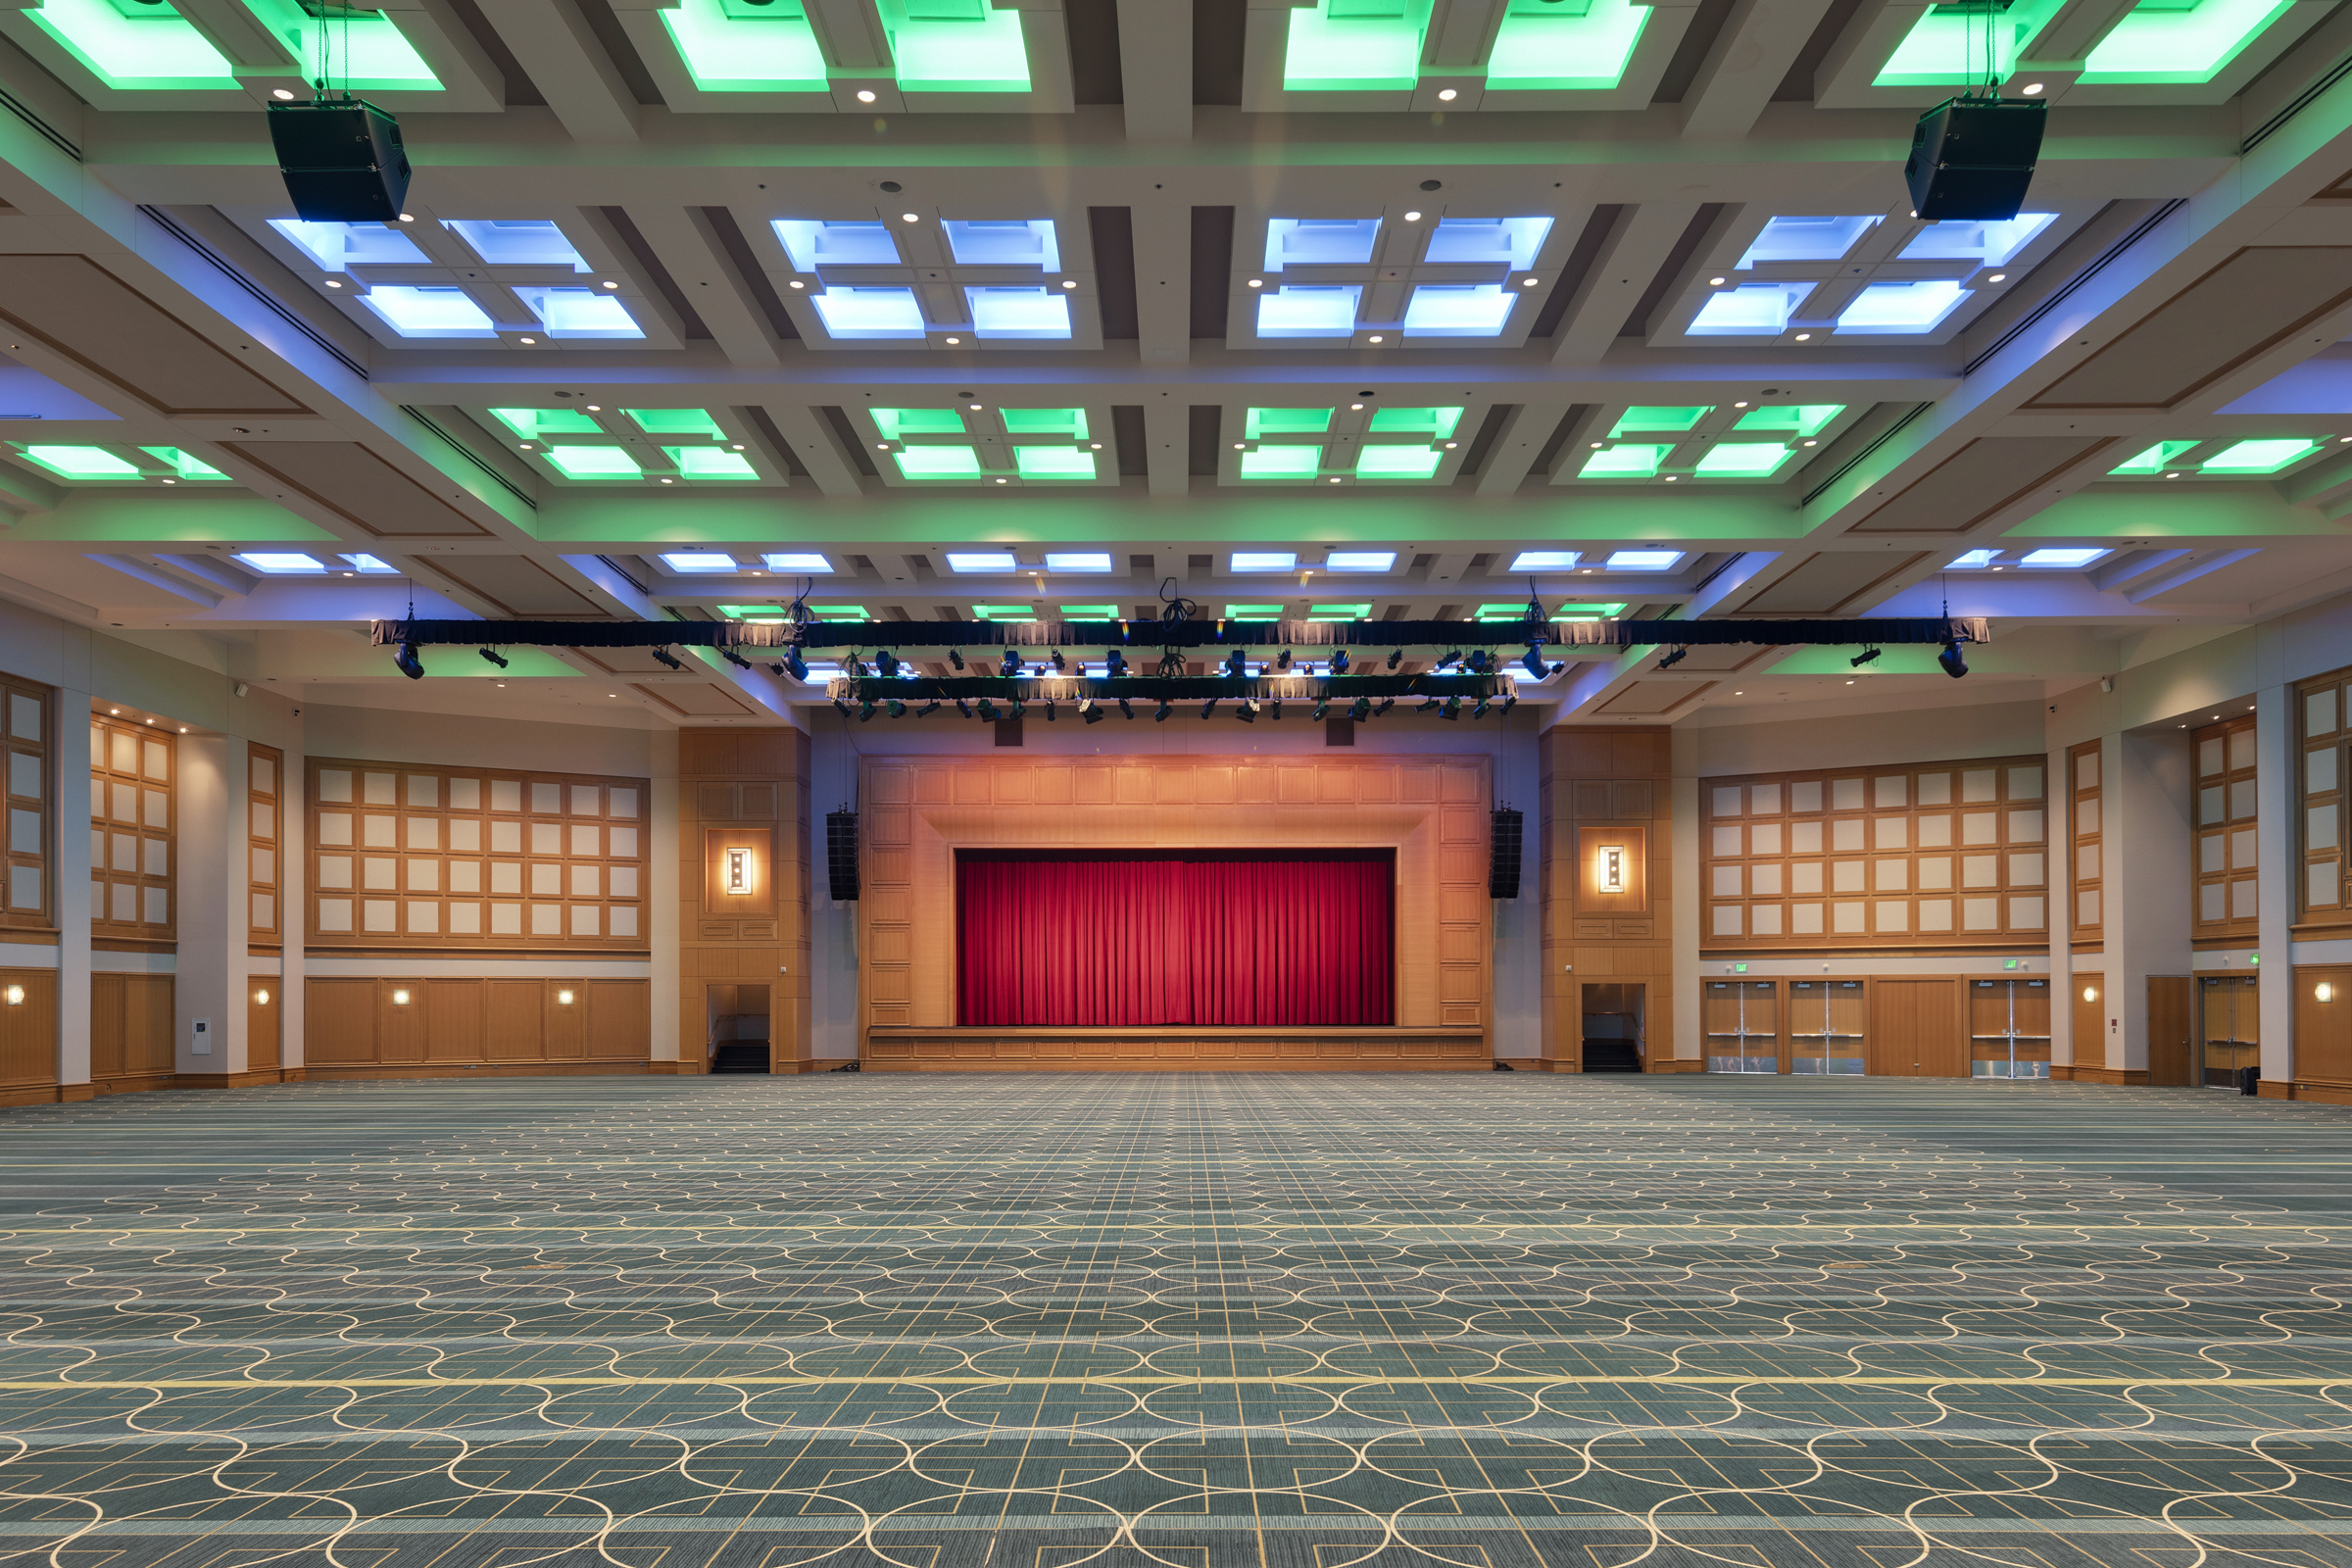 A large, empty ballroom with patterned carpet and blue and green lights on the ceiling leads to a wood-paneled stage covered with a red curtain.